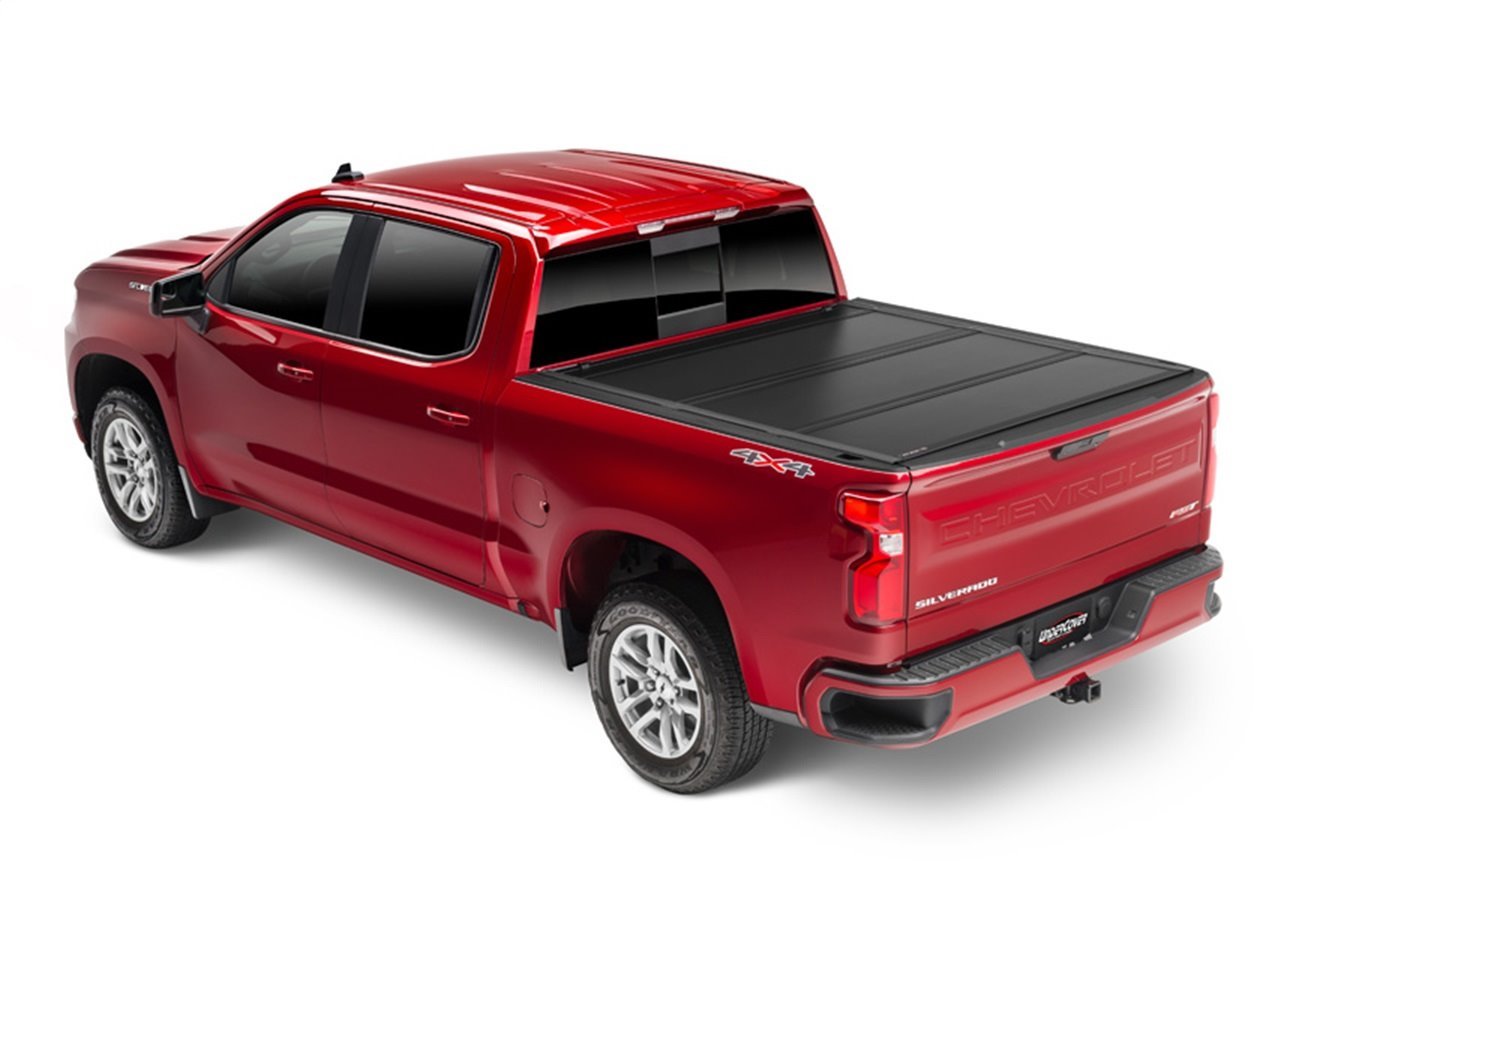 UX52021 Ultra Flex Hard Folding Cover, Fits Select Nissan Frontier 6'1" Bed w/ or w/o Utili-Track System, Matte Black Finish